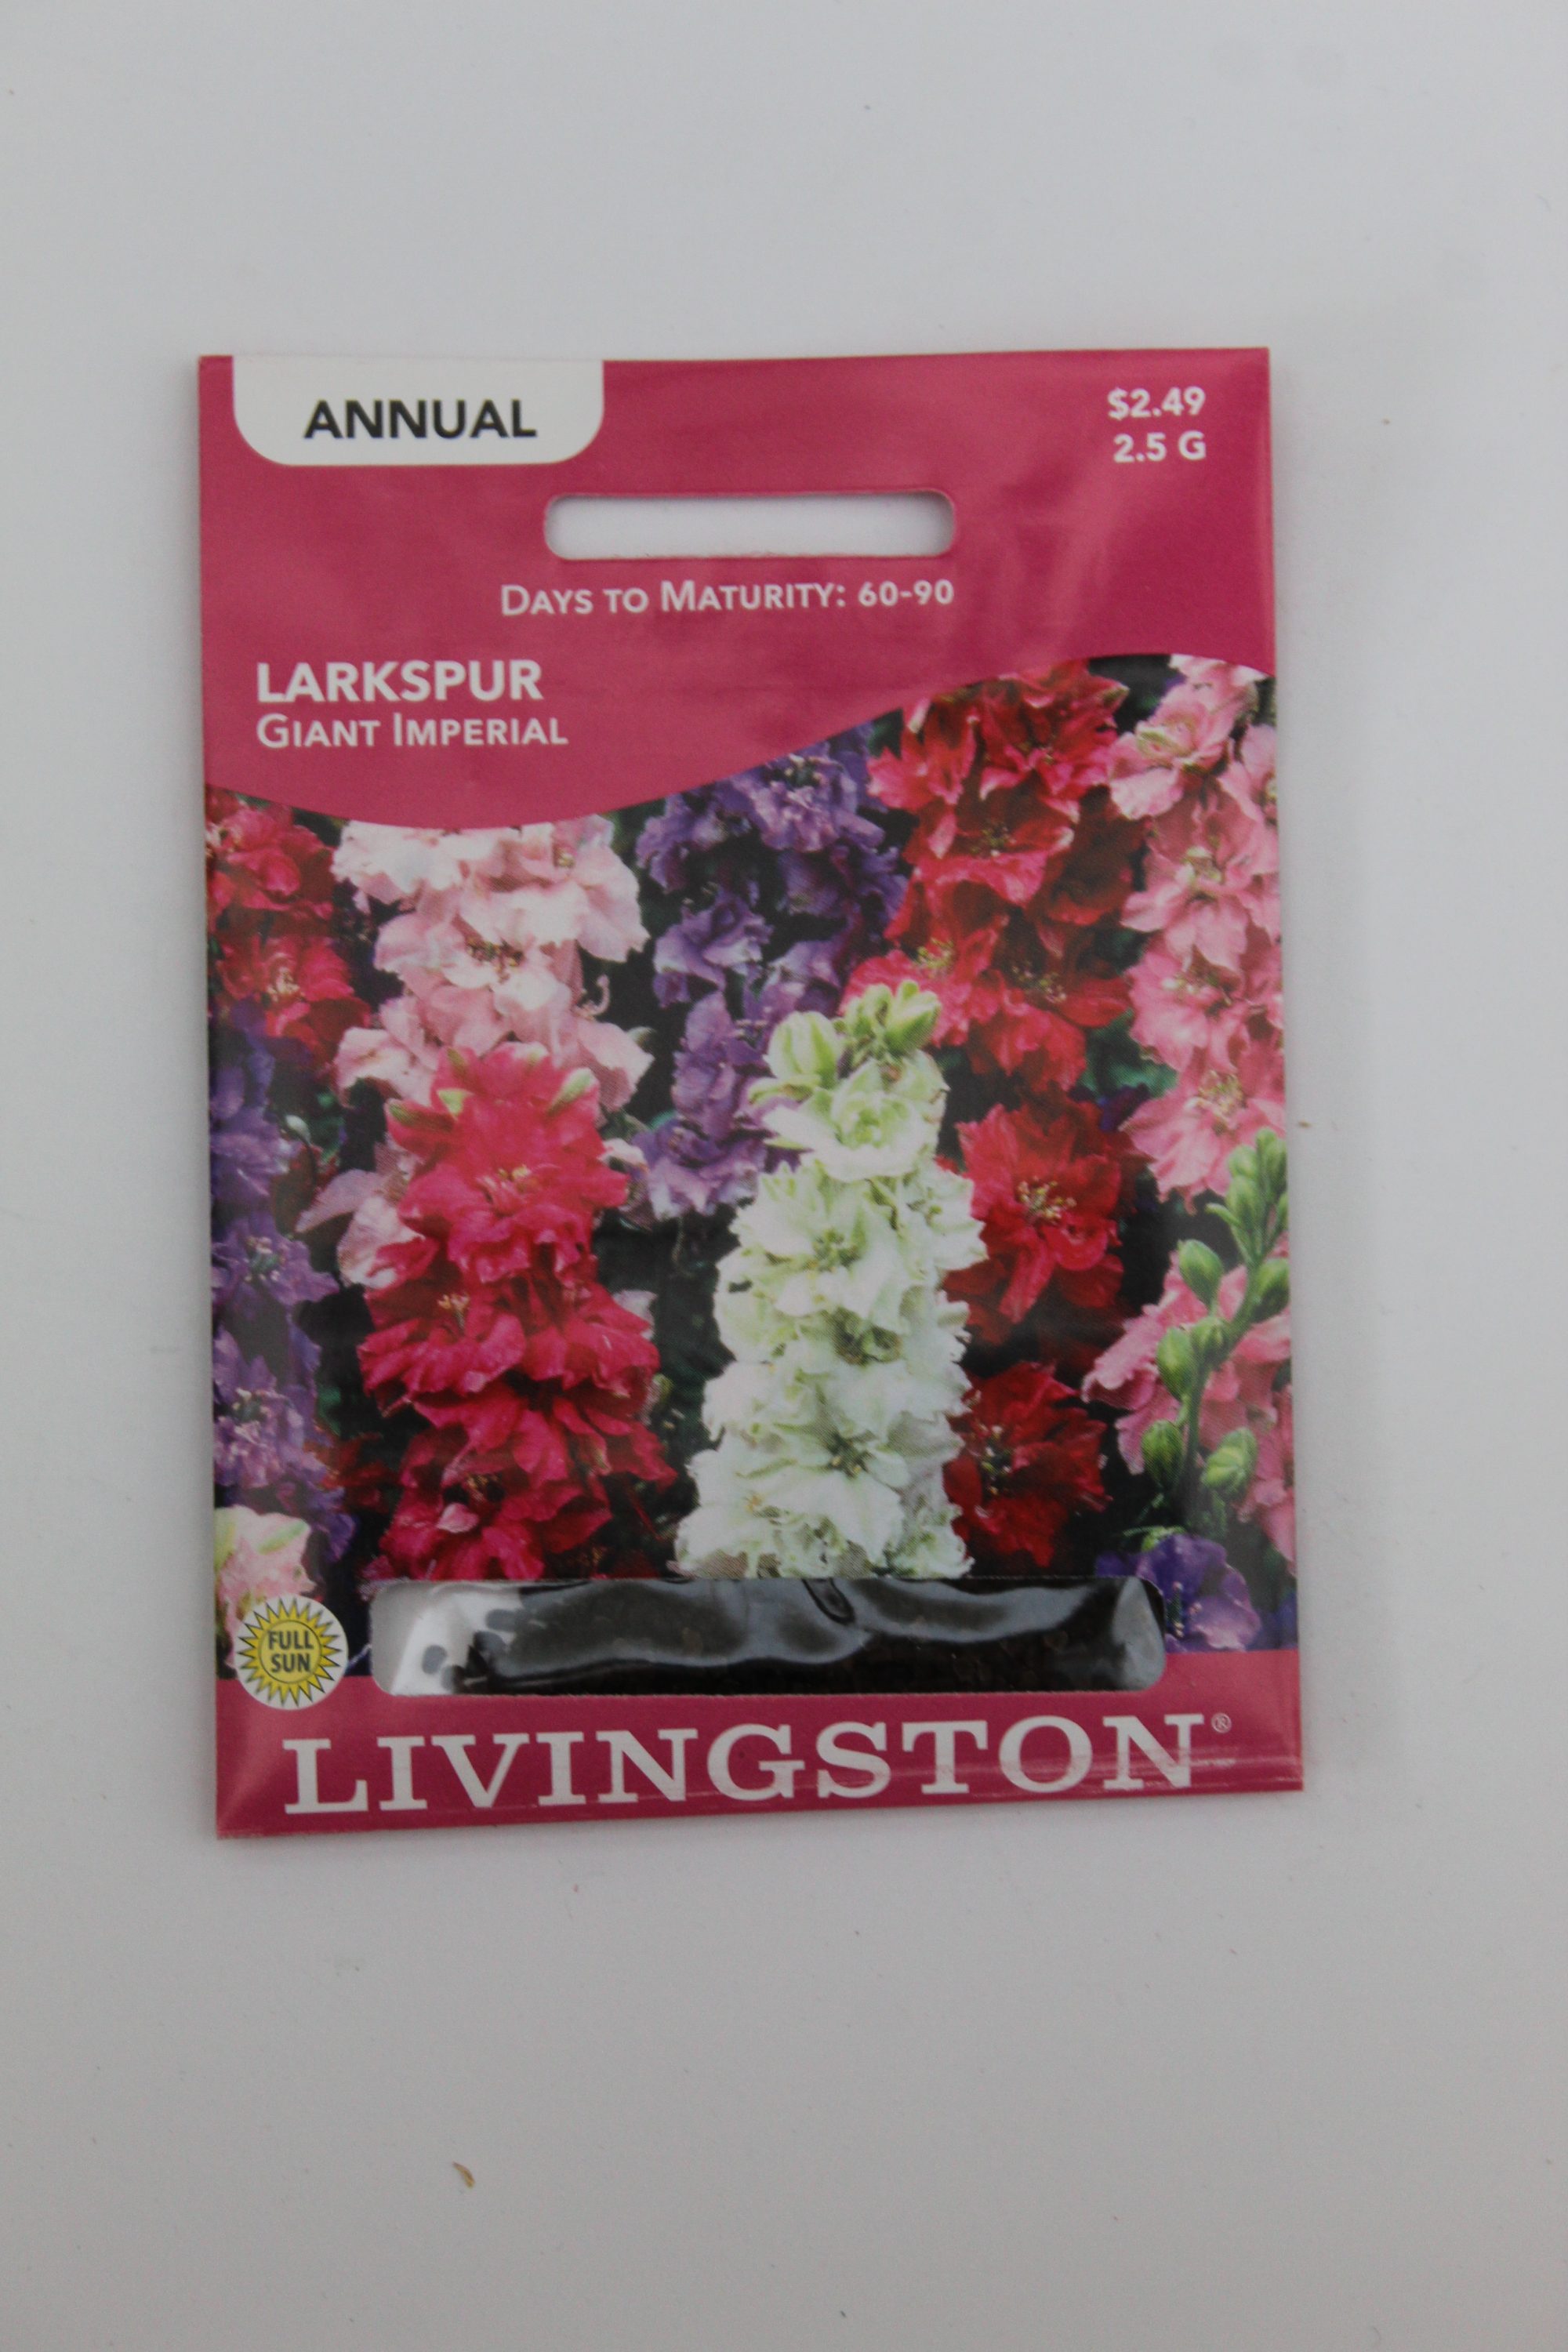 Y1210 Giant Imperial Mix Larkspur Seed, Summer to Fall Bloom, Lavender/Pink/Purple/White Bloom, 1.75 g